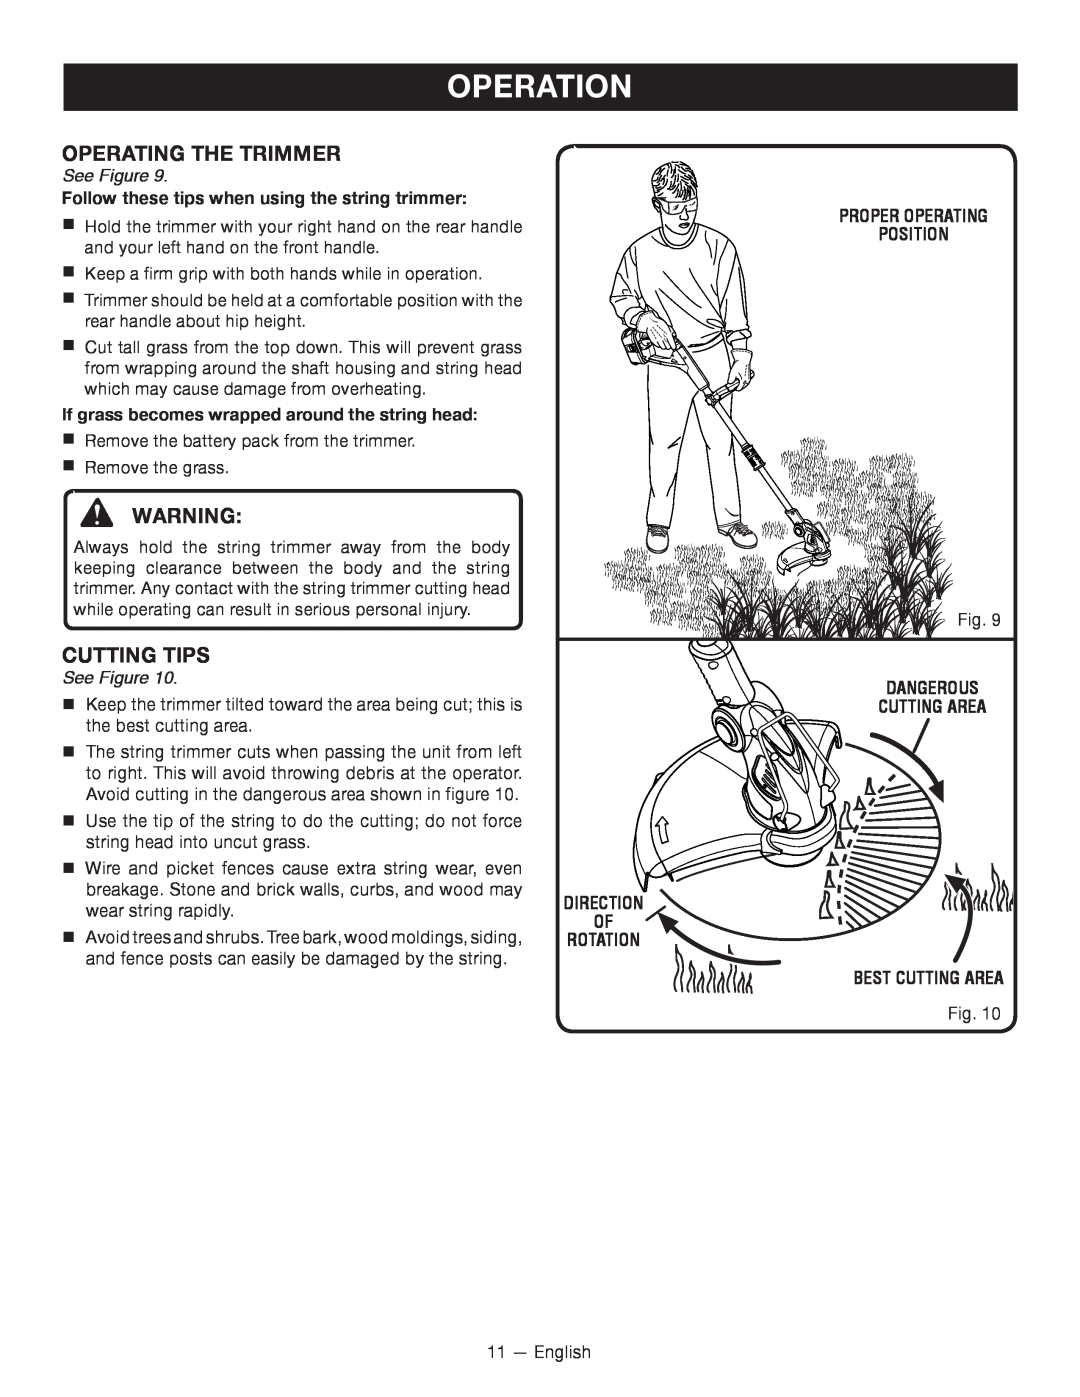 Ryobi P2000 manuel dutilisation Operation, See Figure, Follow these tips when using the string trimmer, direction, rotation 